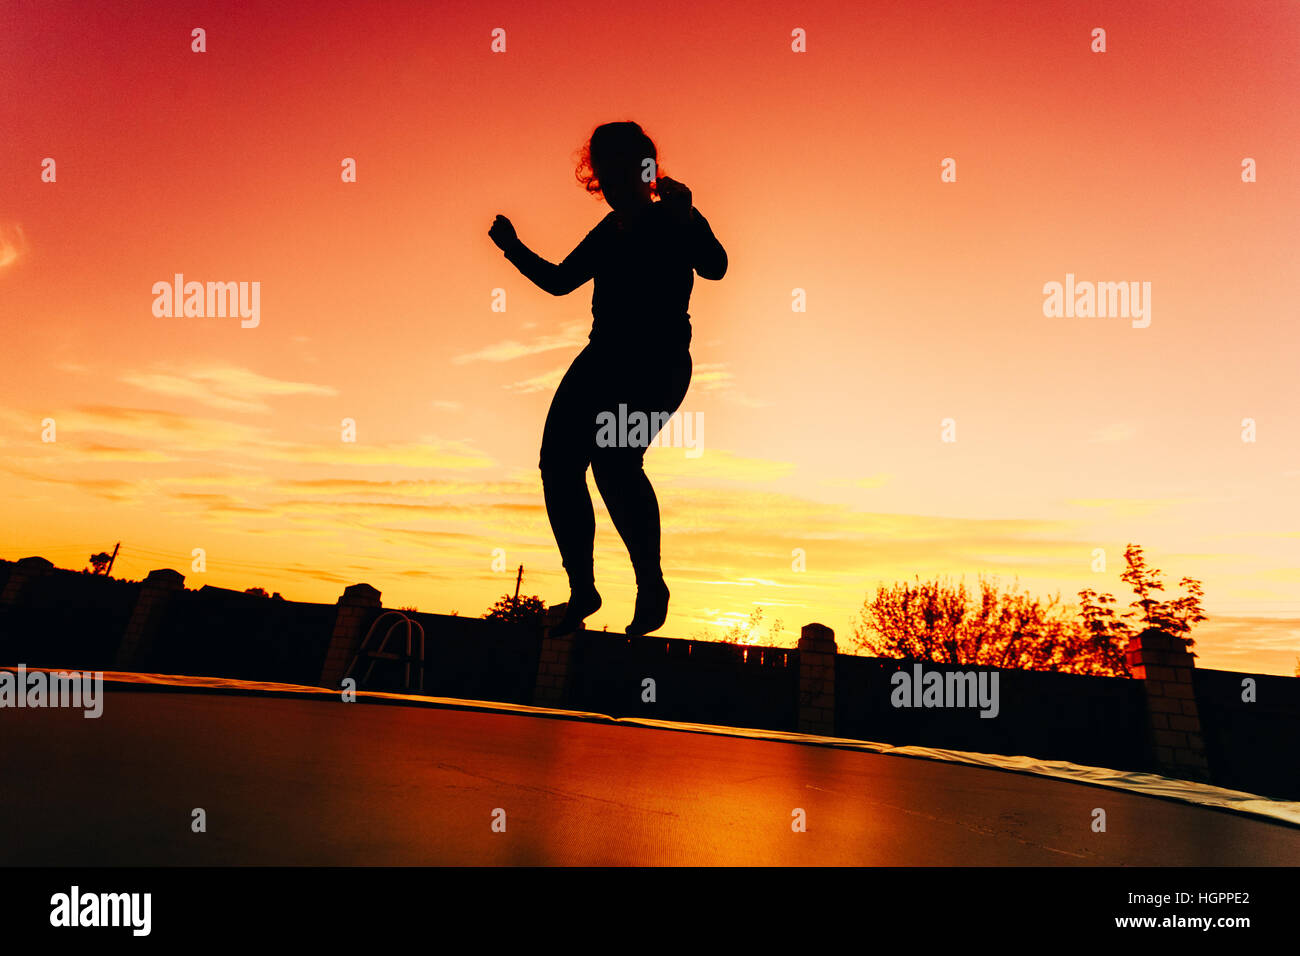 Silhouette Of Beautiful Plus Size Young Woman Girl Jumping On Trampoline On Evening Red, Orange Colorful Sunset Sky Background Stock Photo